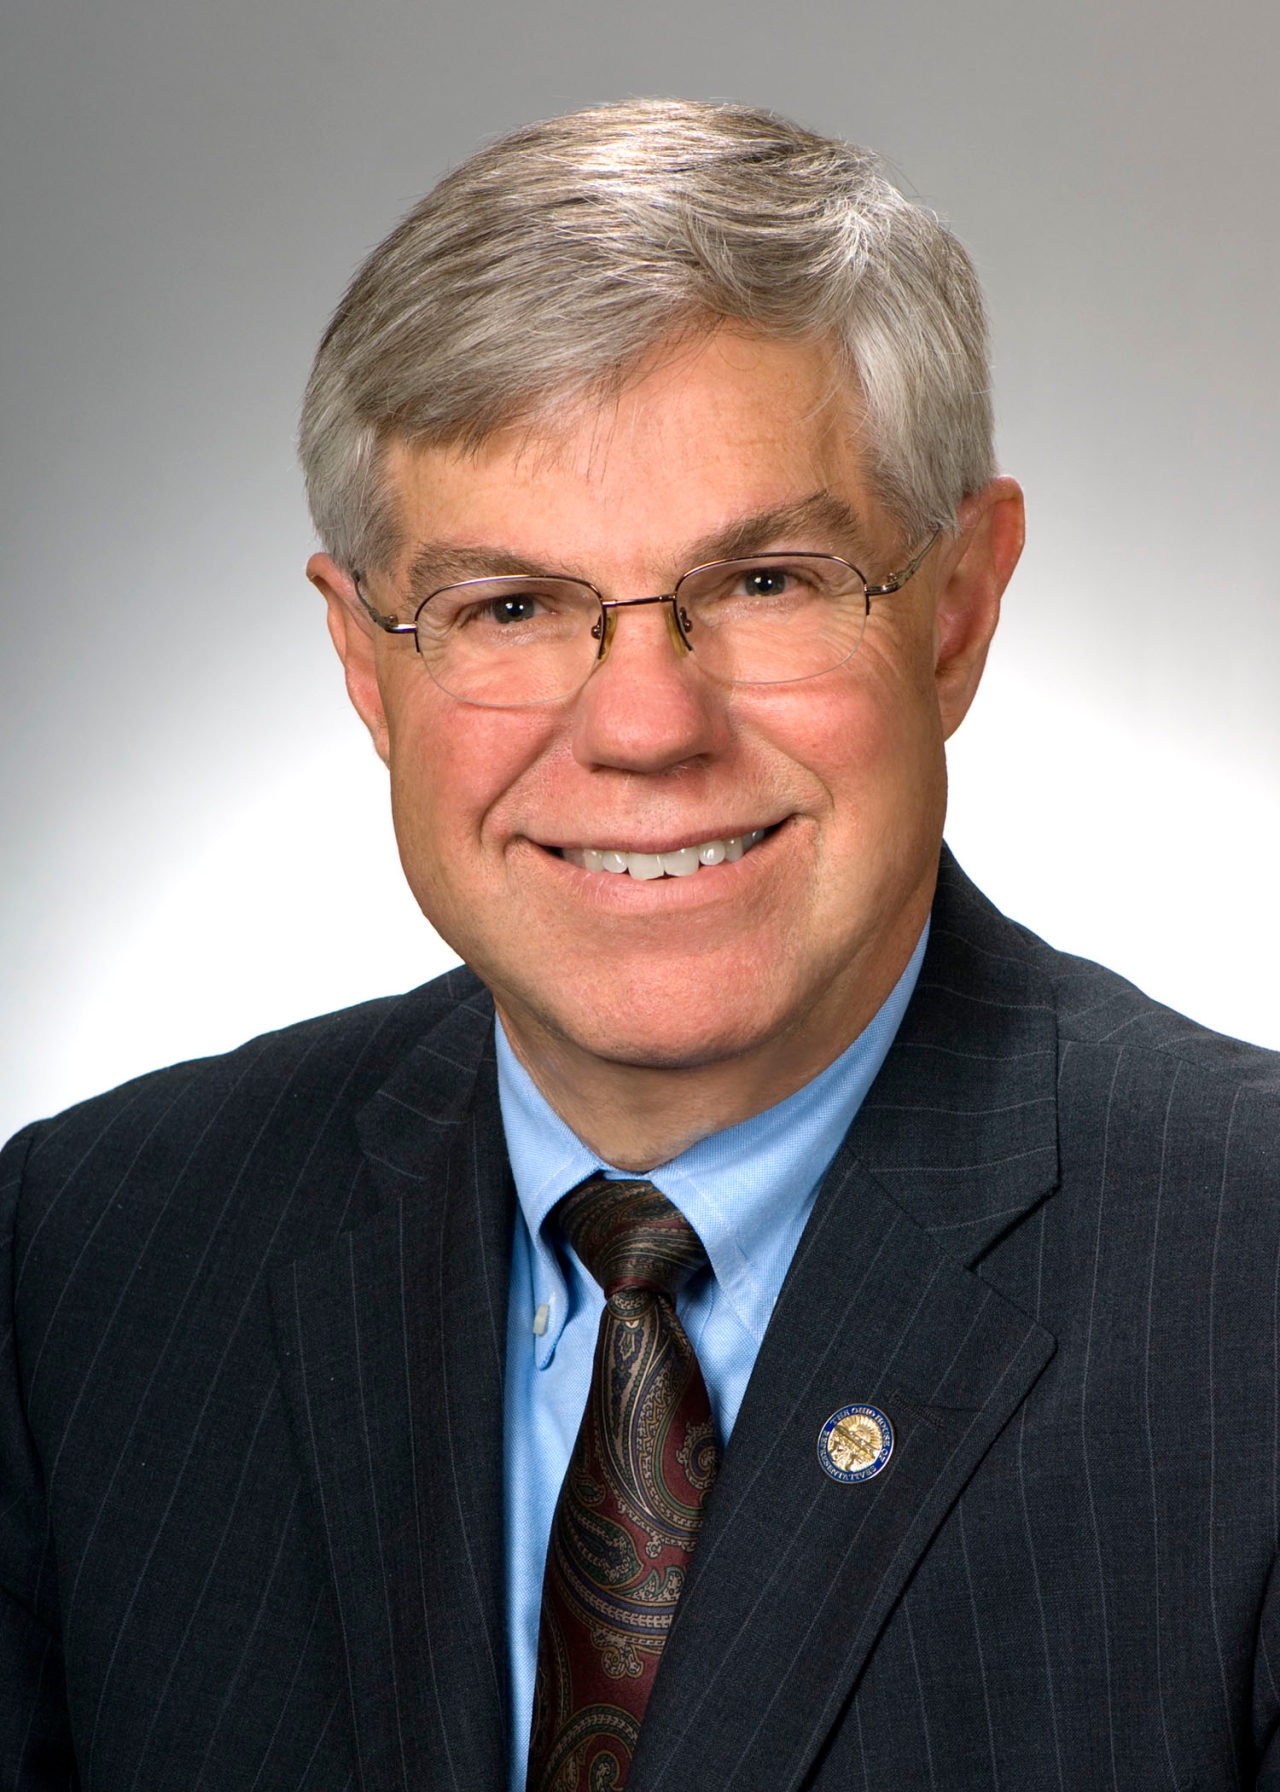 State Rep. Scherer Named Legislator of the Year by the Ohio Association of County Boards of Developmental Disabilities